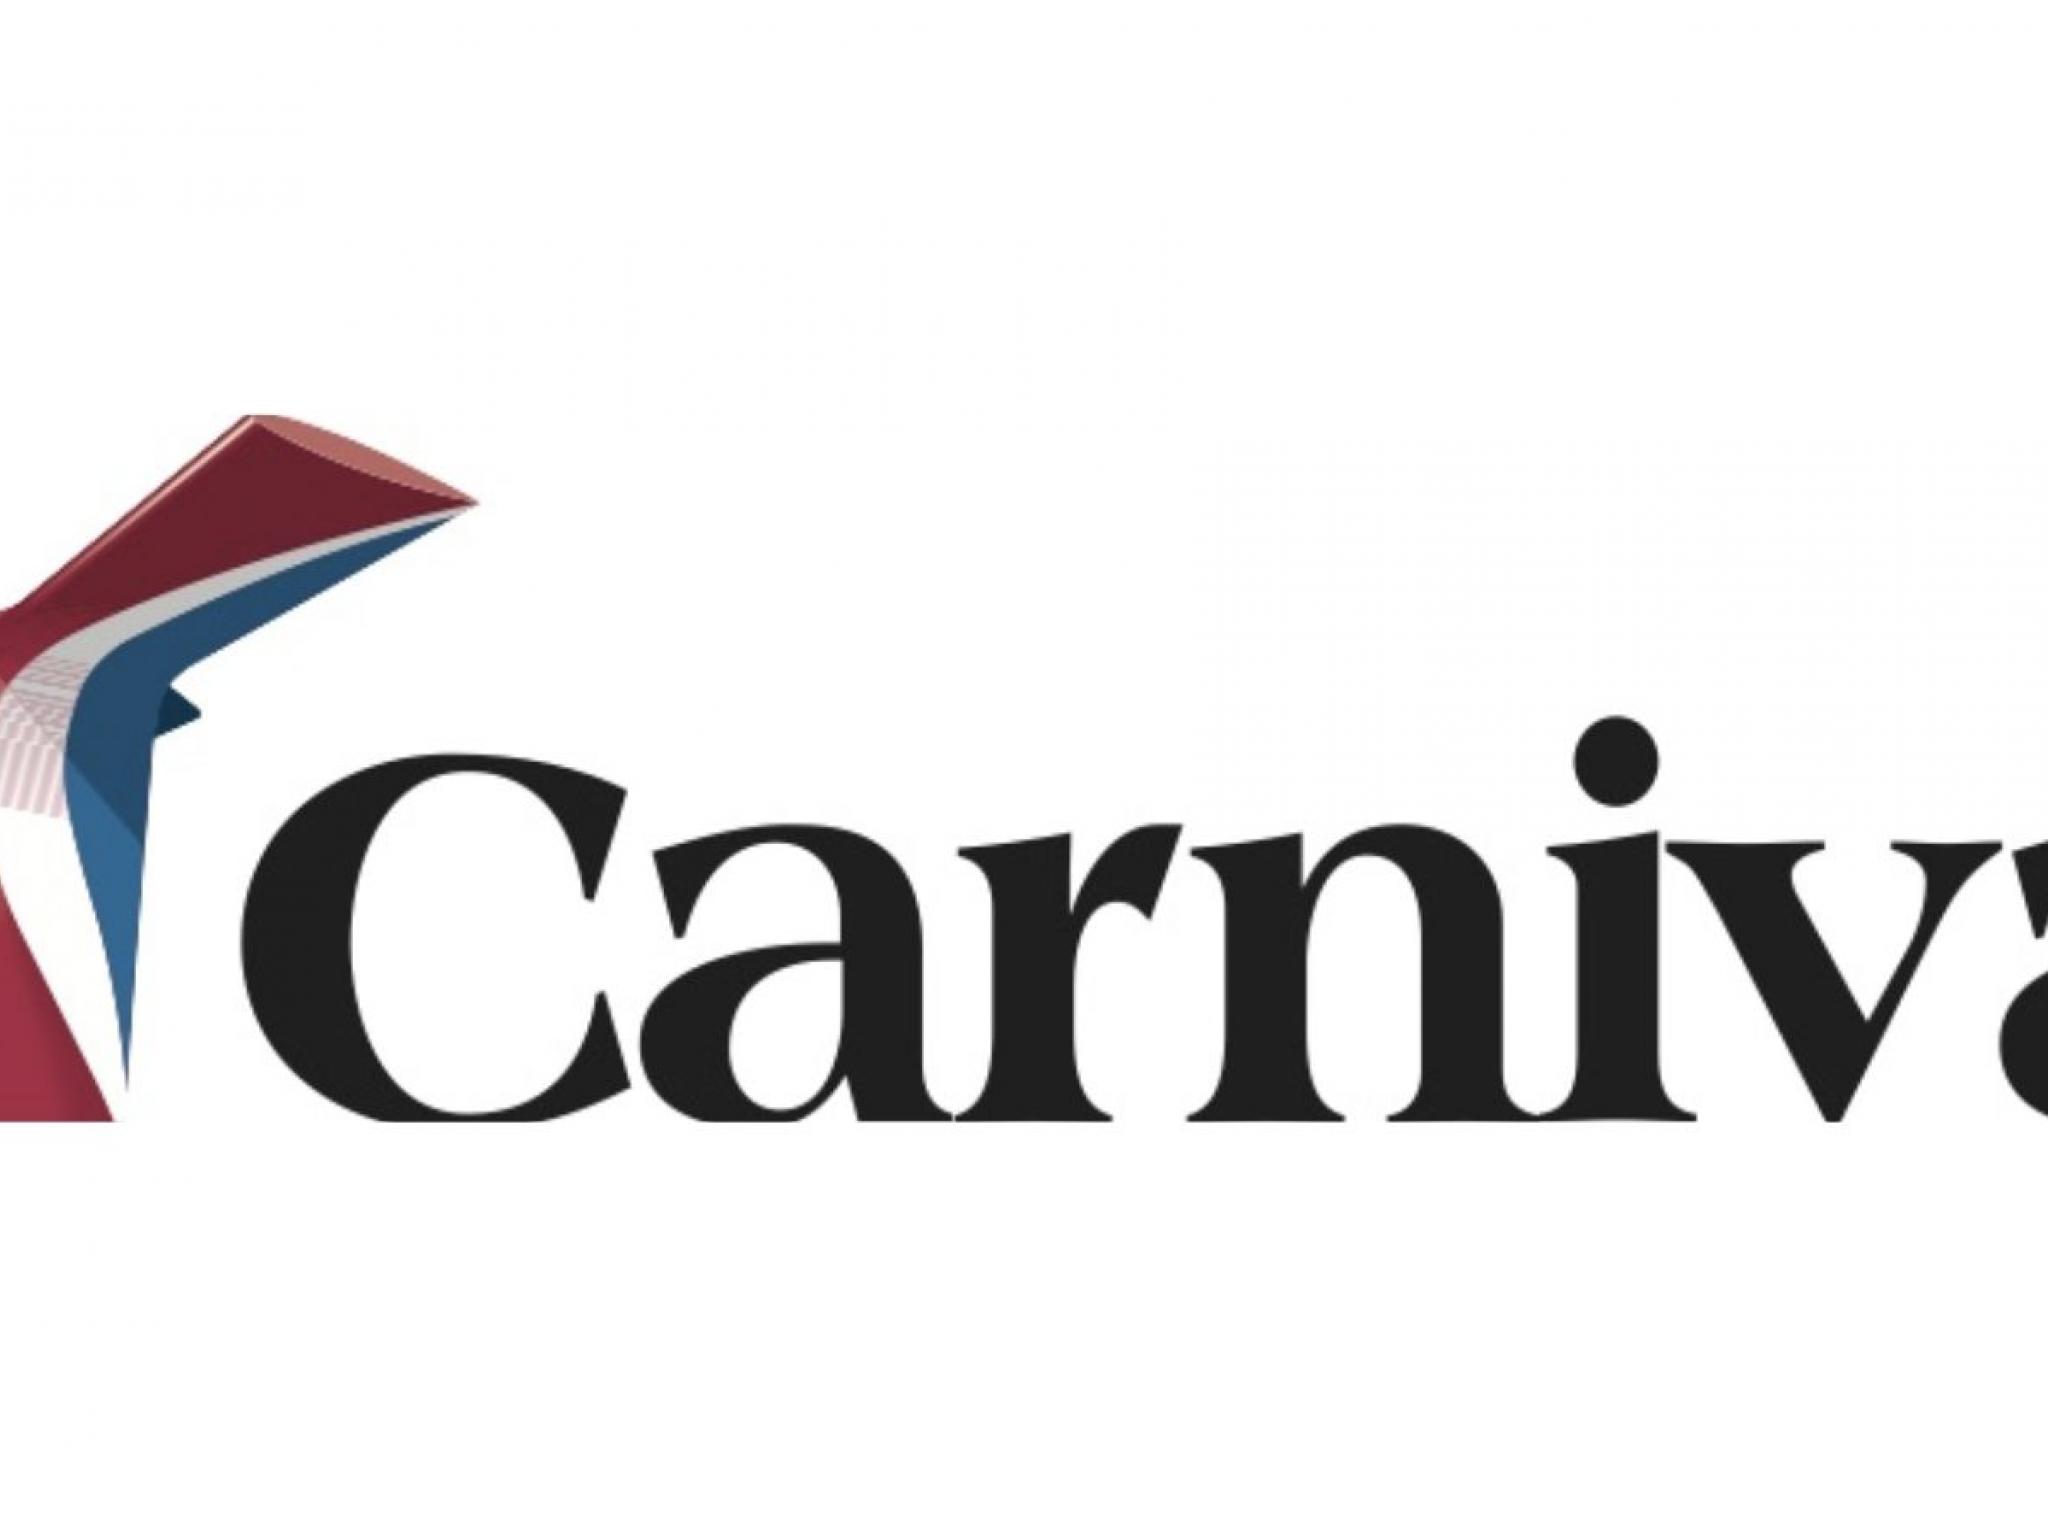  over-1m-bet-on-carnival-check-out-these-3-stocks-insiders-are-buying 